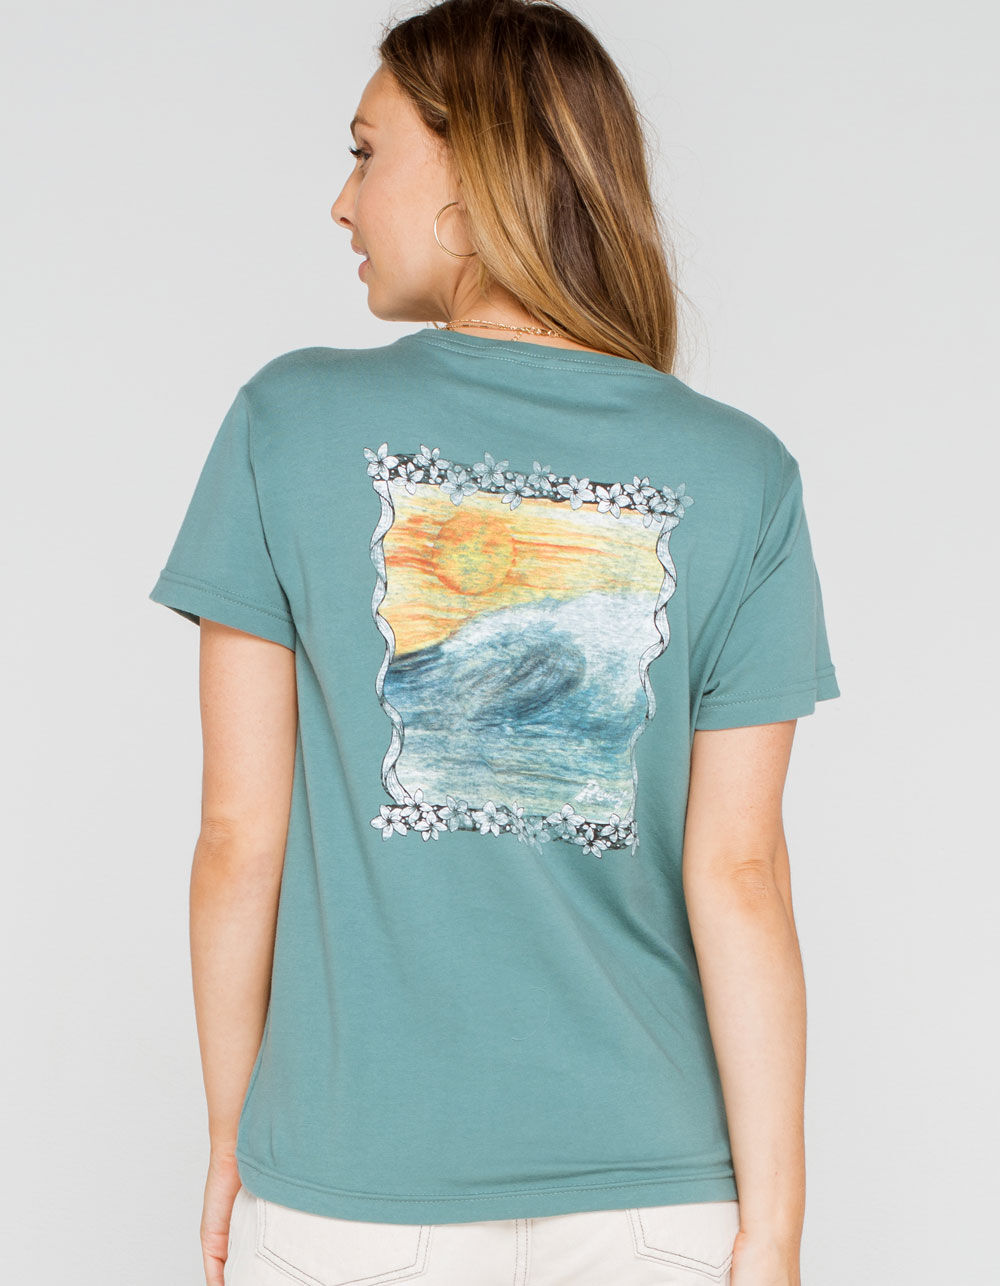 ROXY Wave And Sun Womens Tee image number 0